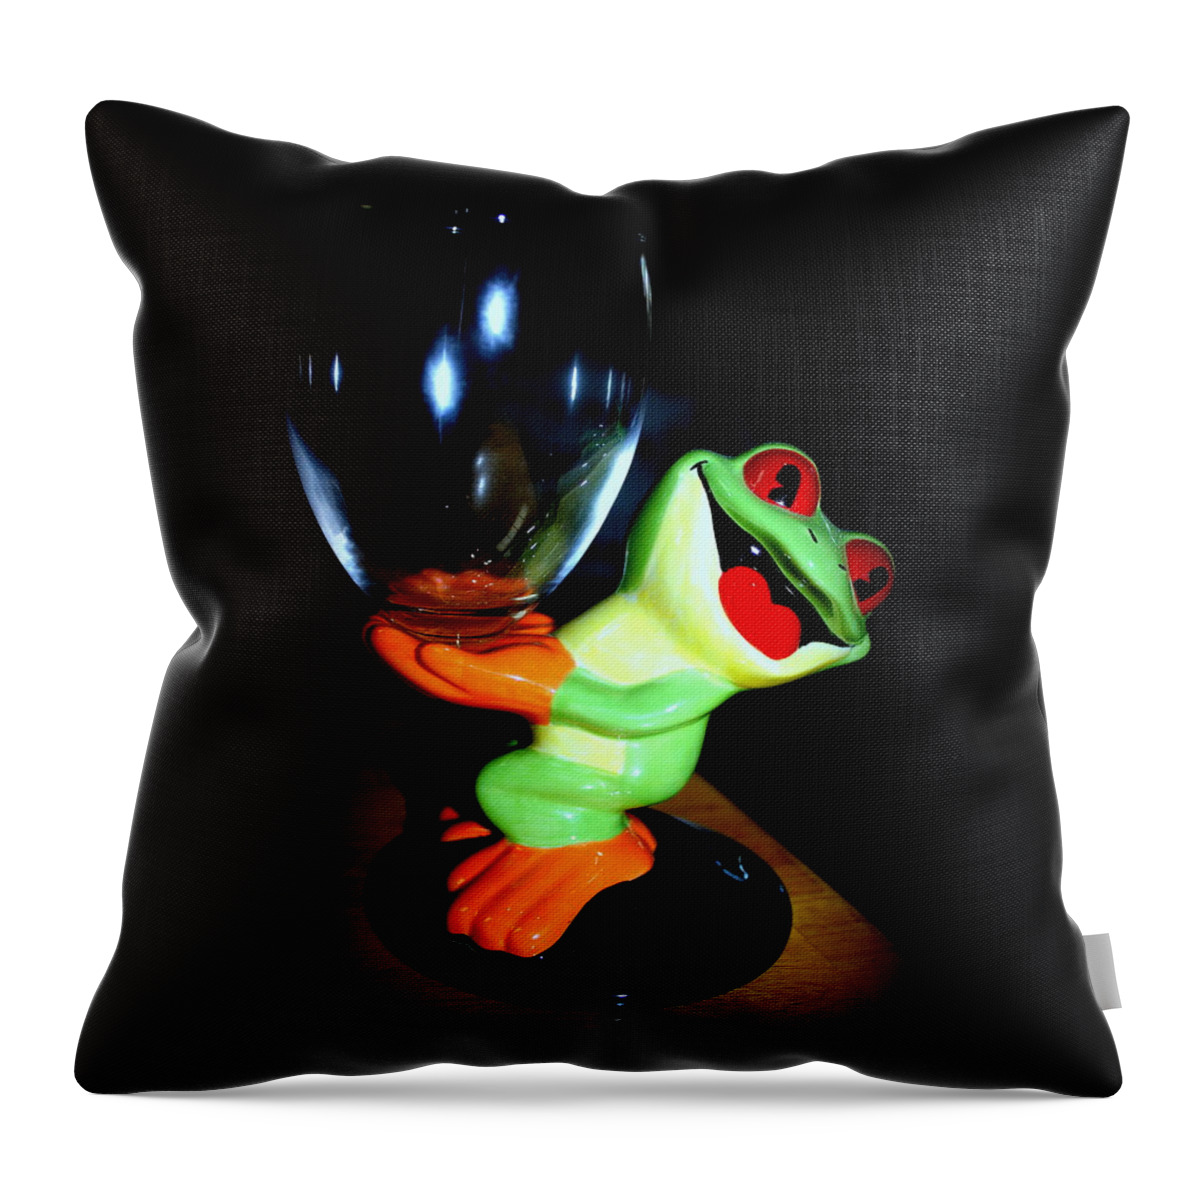 Frog Throw Pillow featuring the photograph La' Frog by Debra Forand